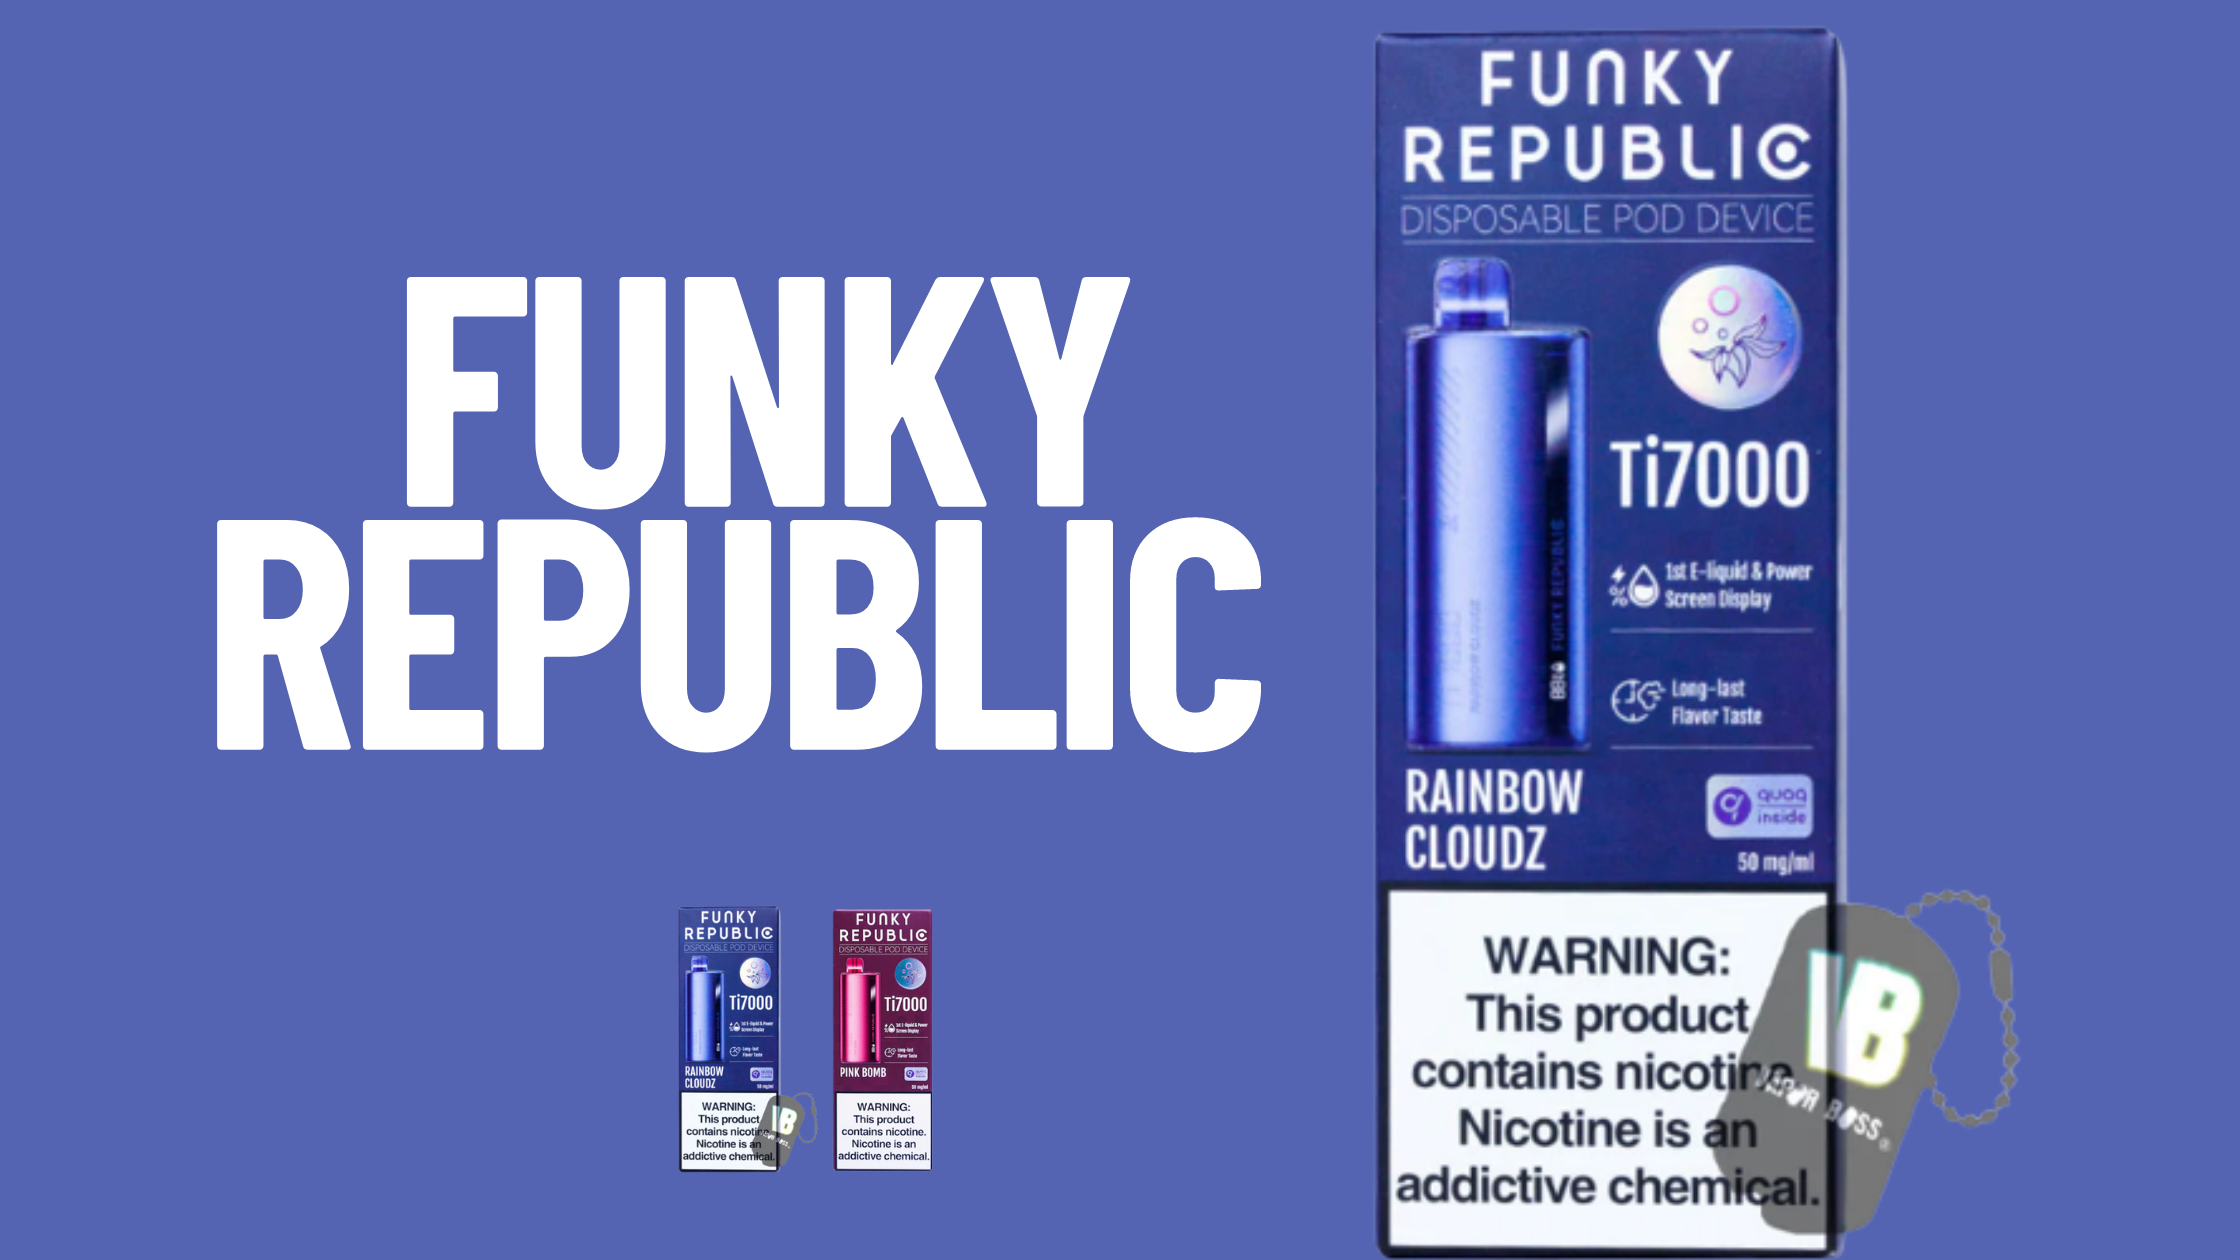 Understanding Everything About The Funky Republic Vapes!